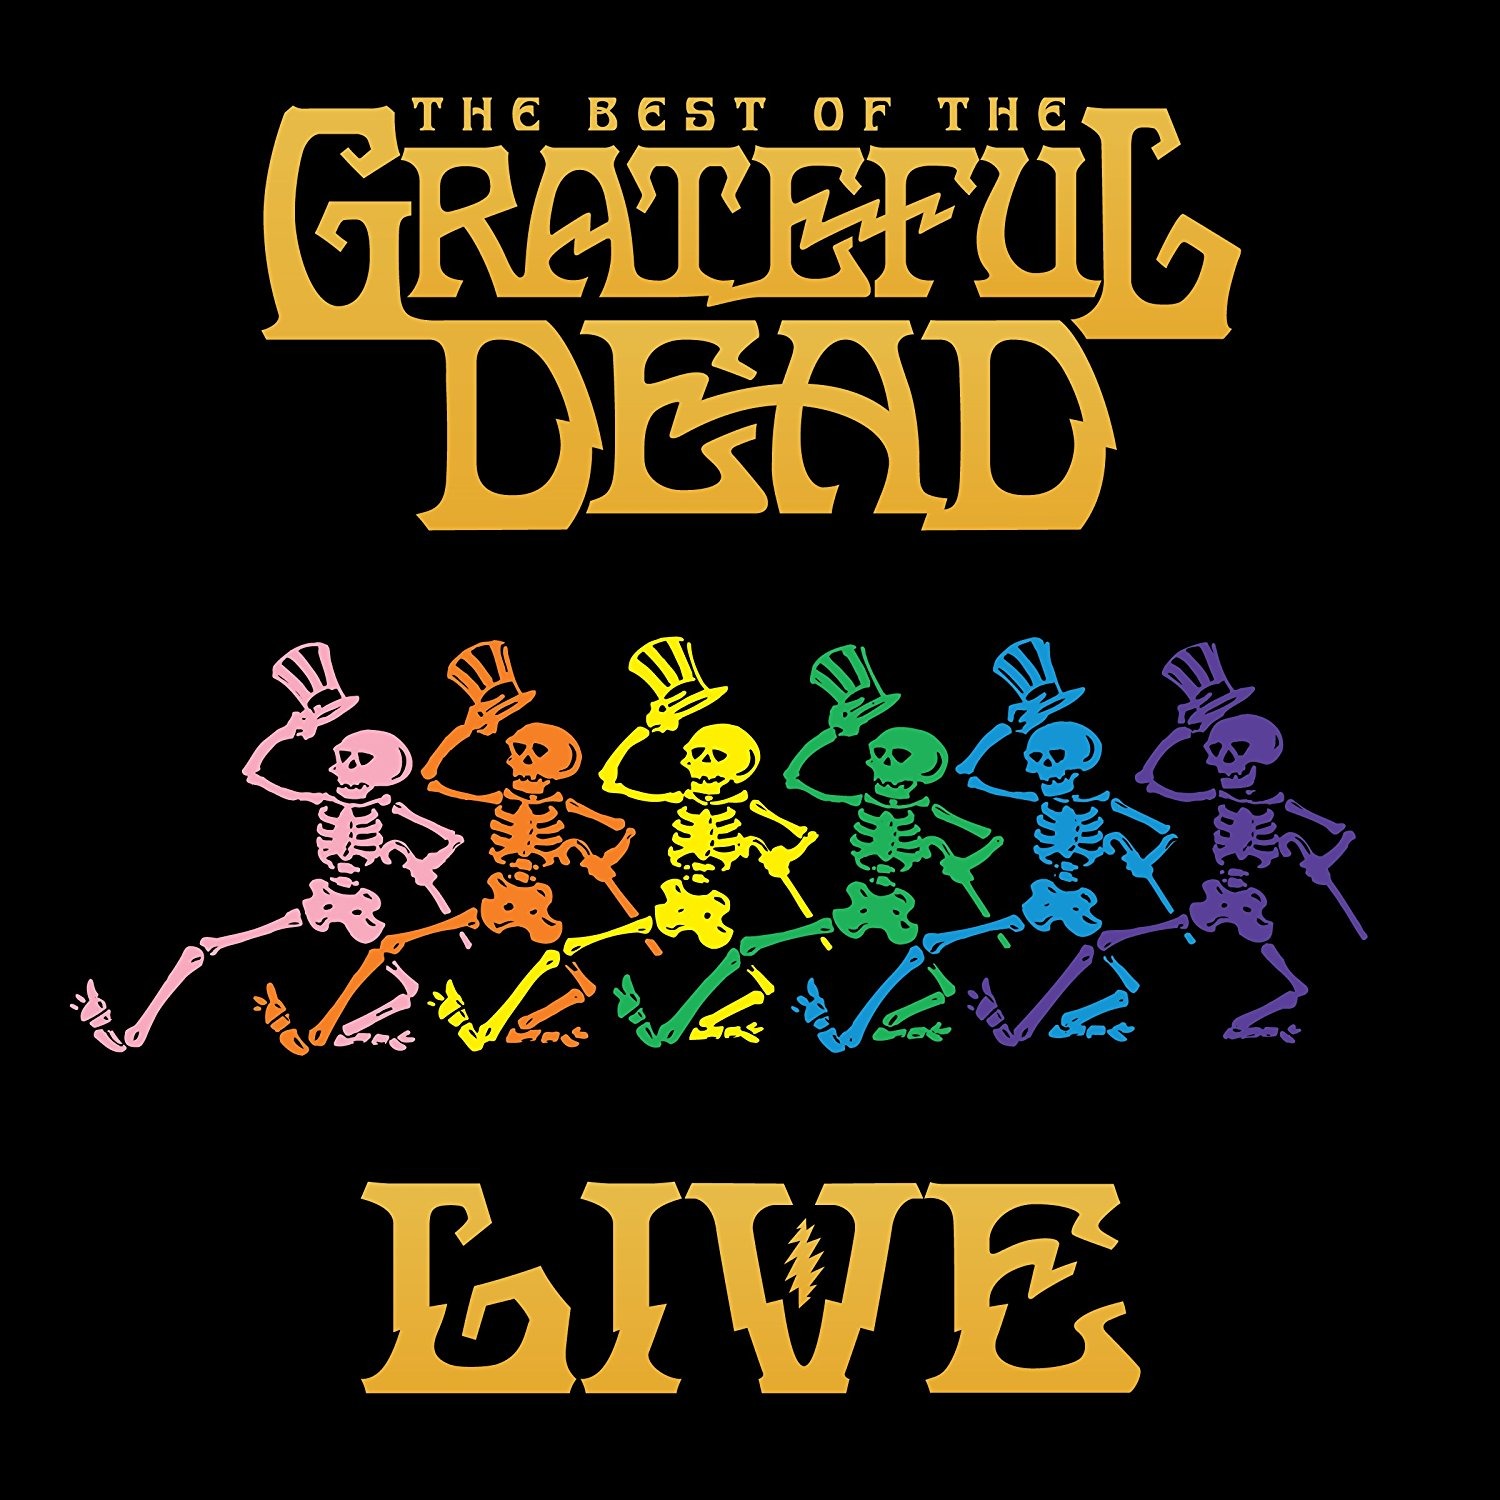 THE BEST OF THE GRATEFUL DEAD